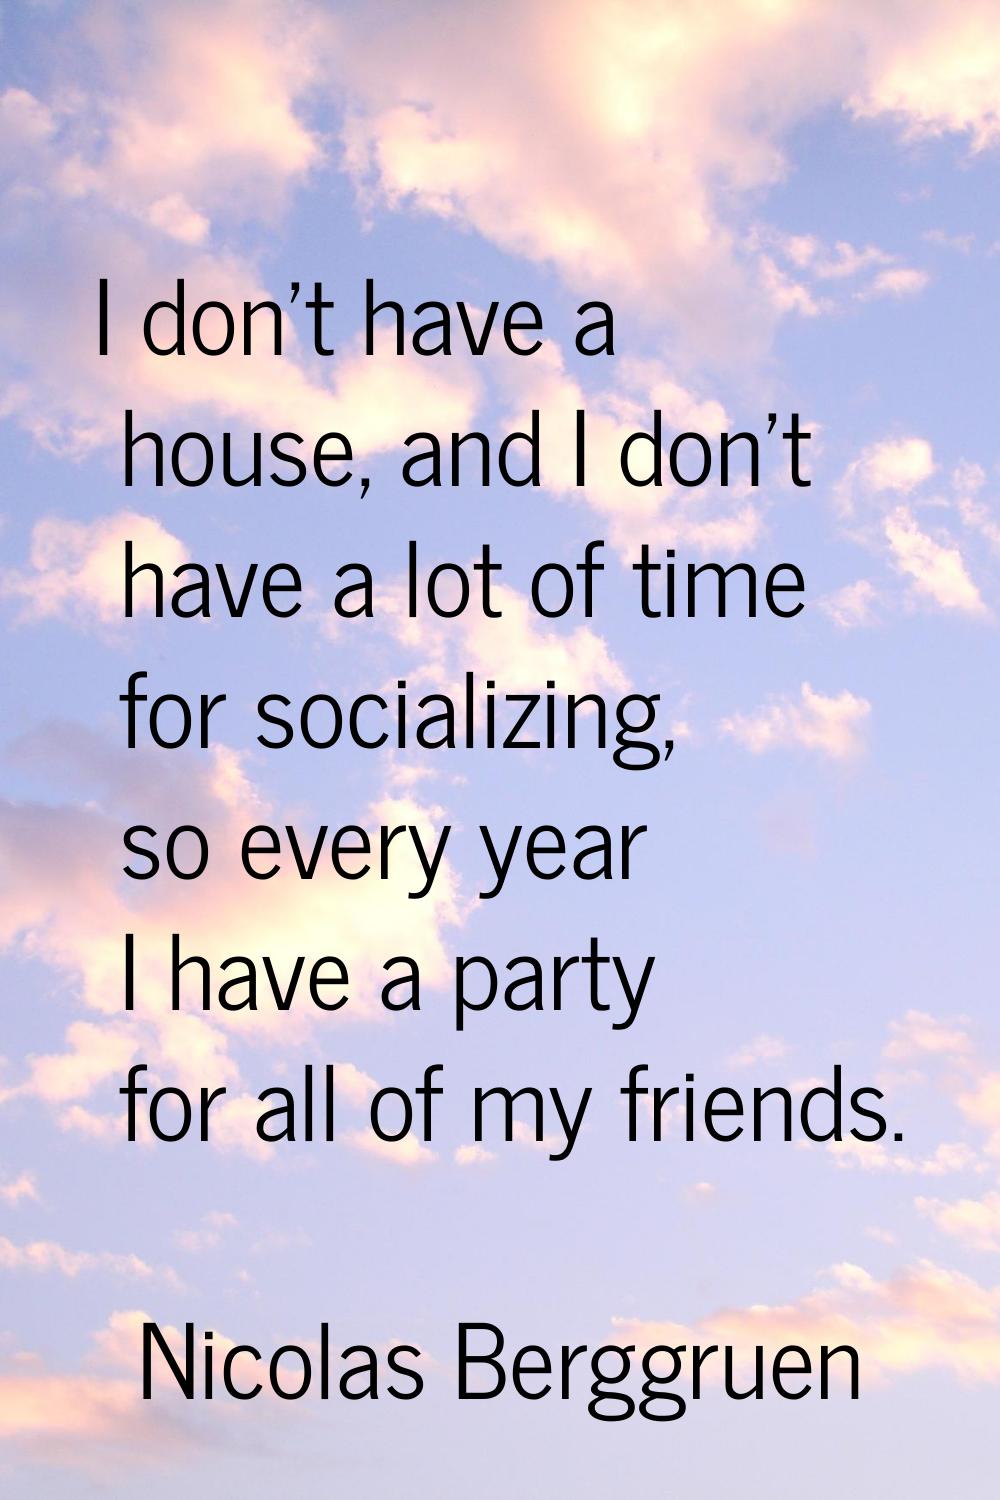 I don't have a house, and I don't have a lot of time for socializing, so every year I have a party 